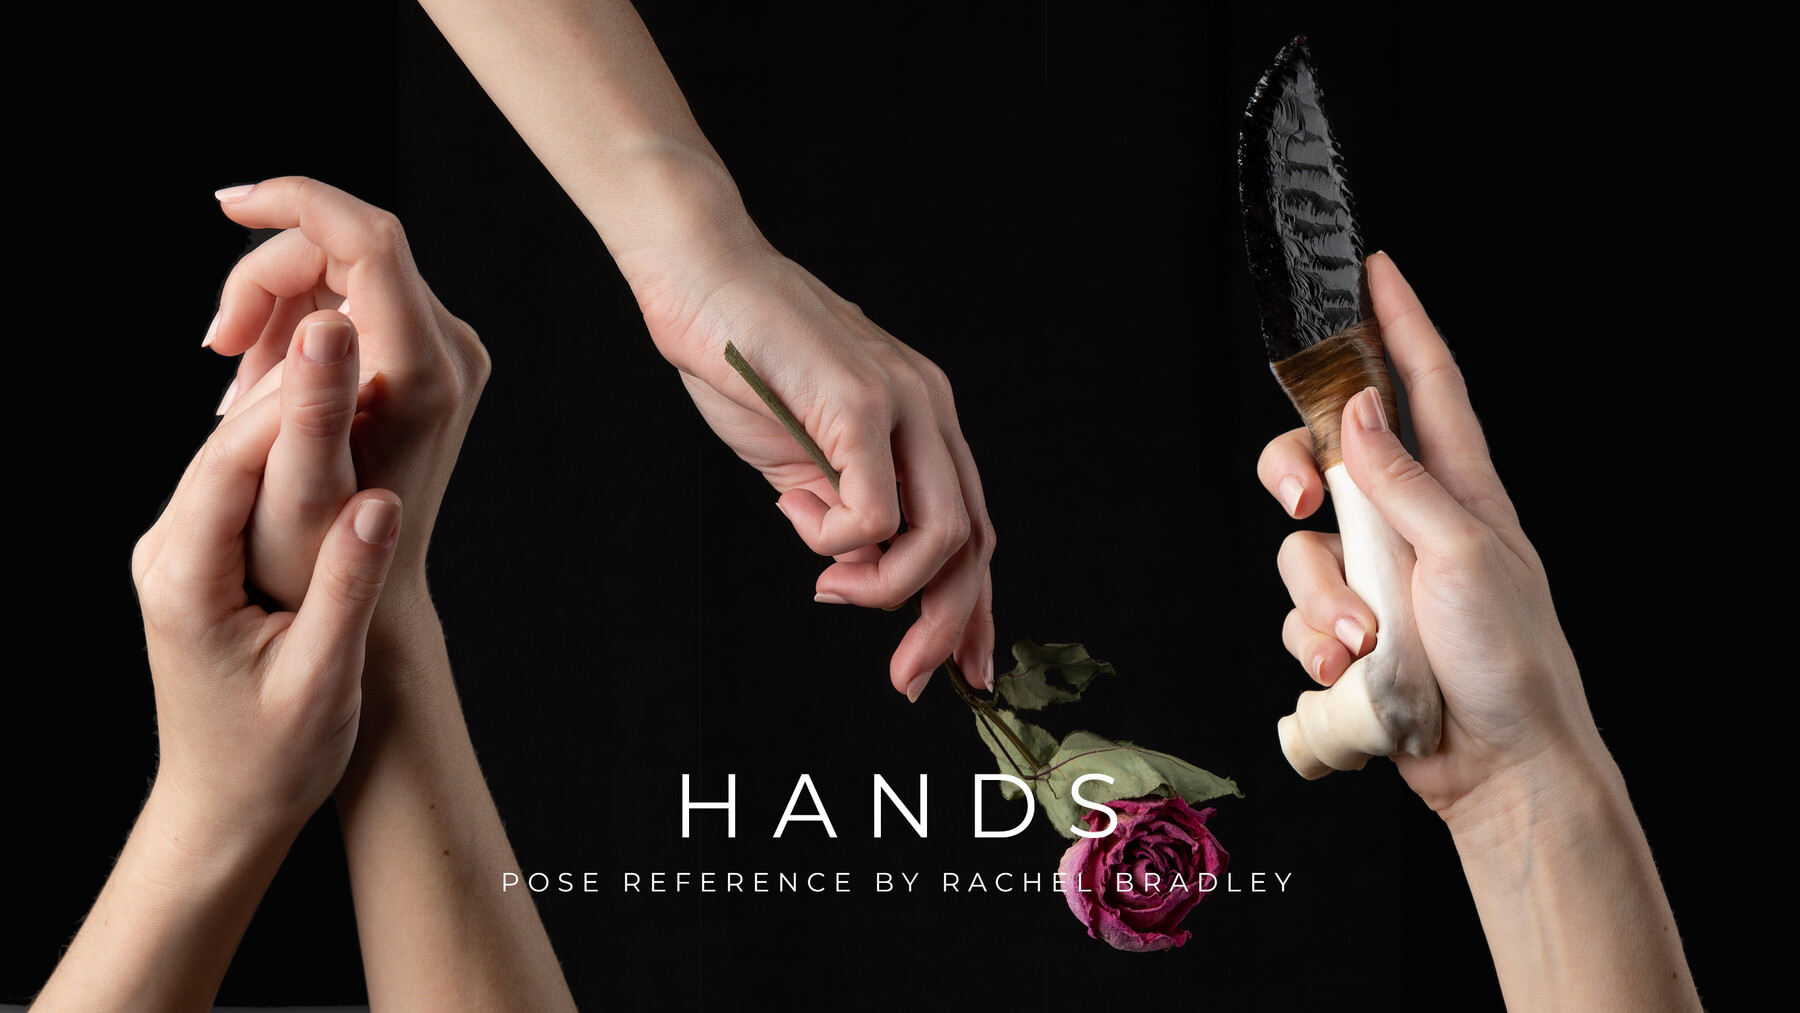 Rachel Bradley - Hands - Pose Reference for Artists